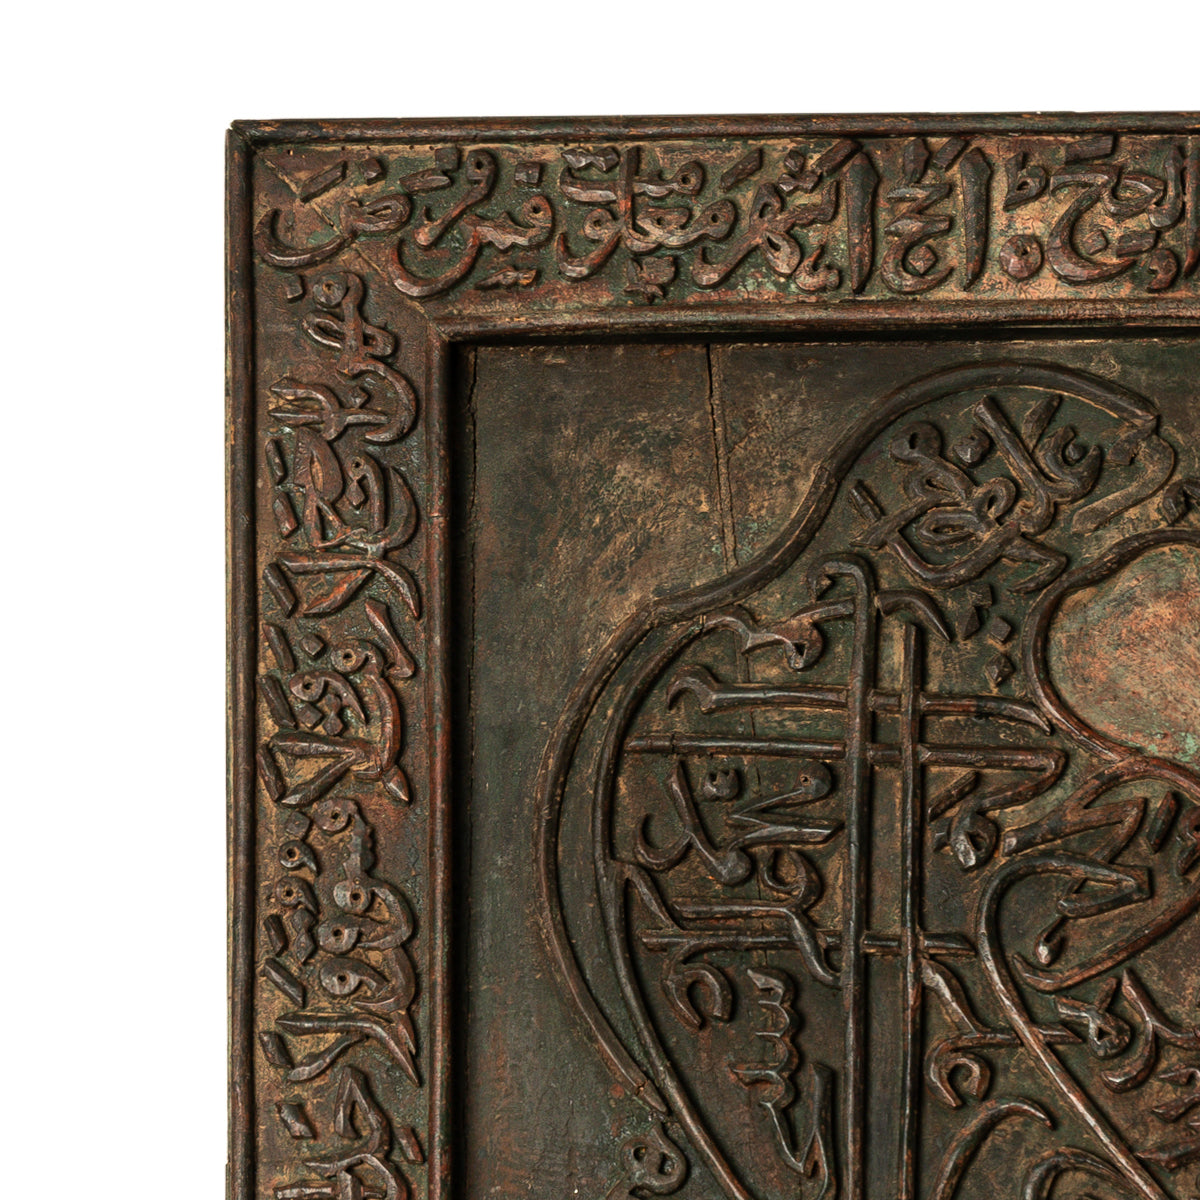 Antique Islamic Zoomorphic Carved Wooden Falcon Panel Quran Calligraphy Deccan